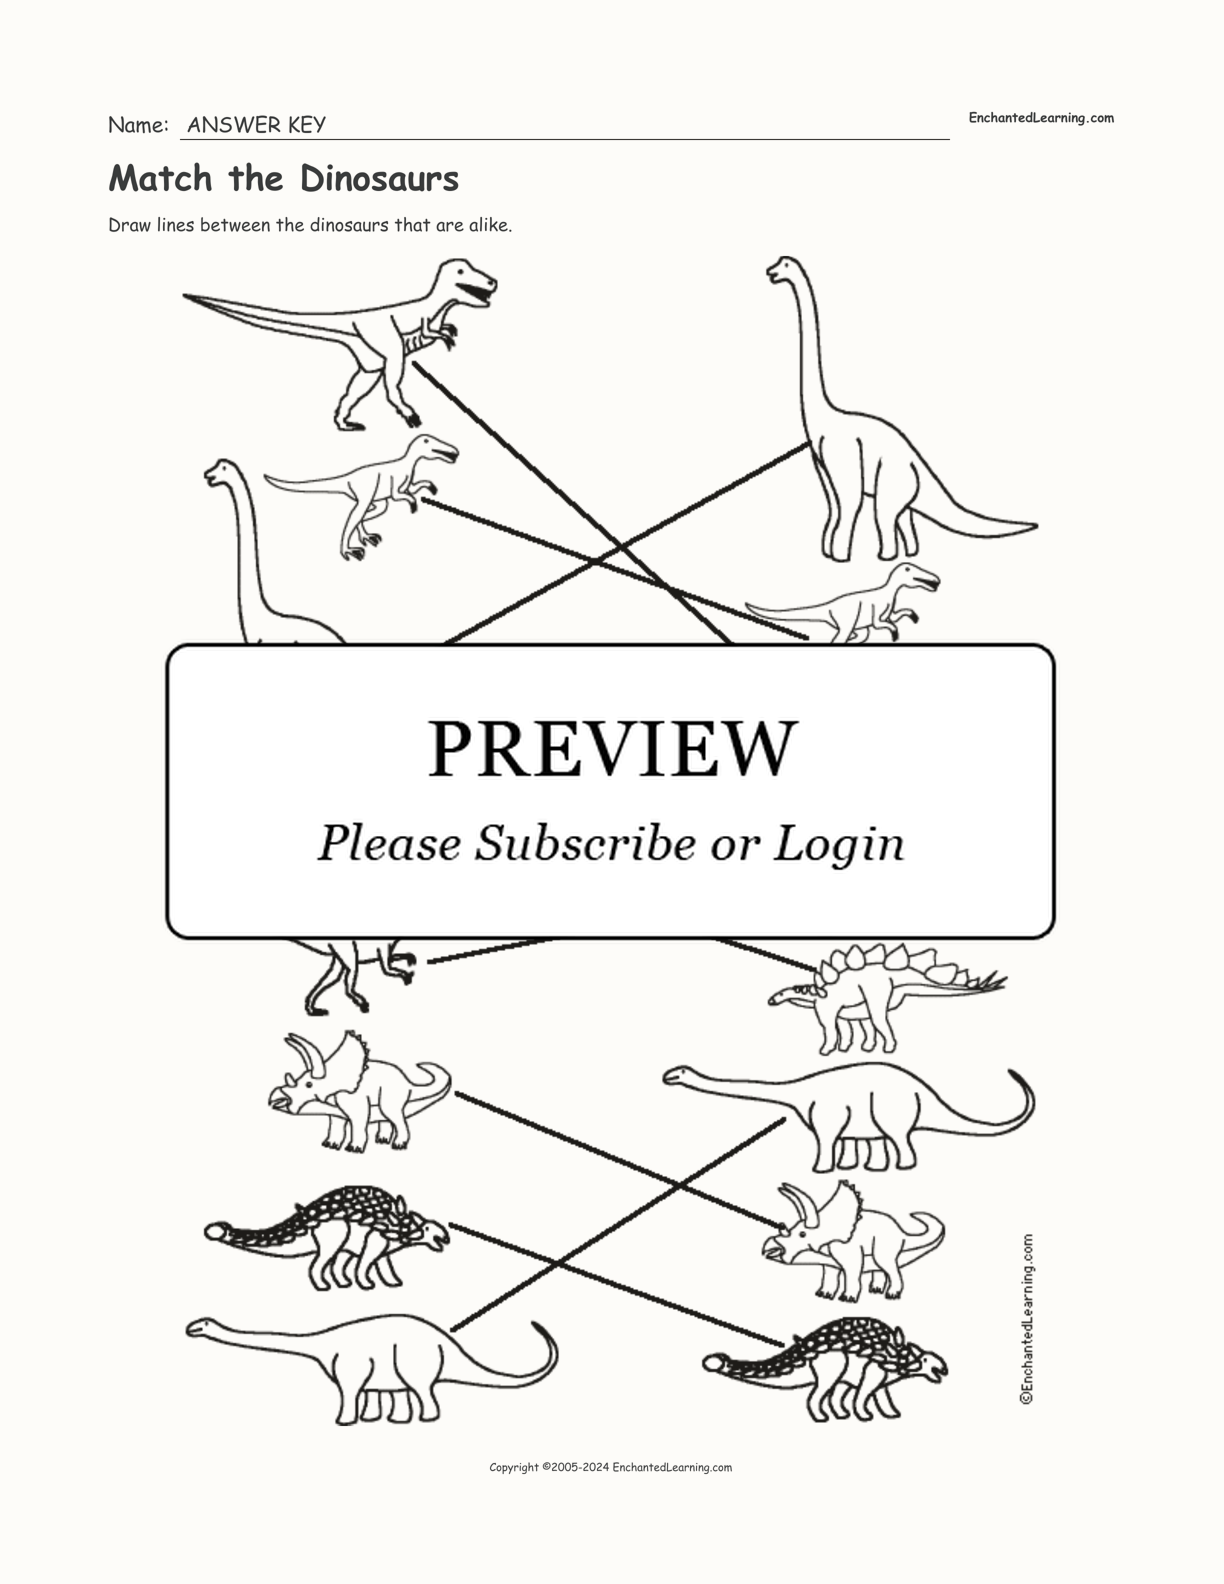 Match the Dinosaurs interactive worksheet page 2